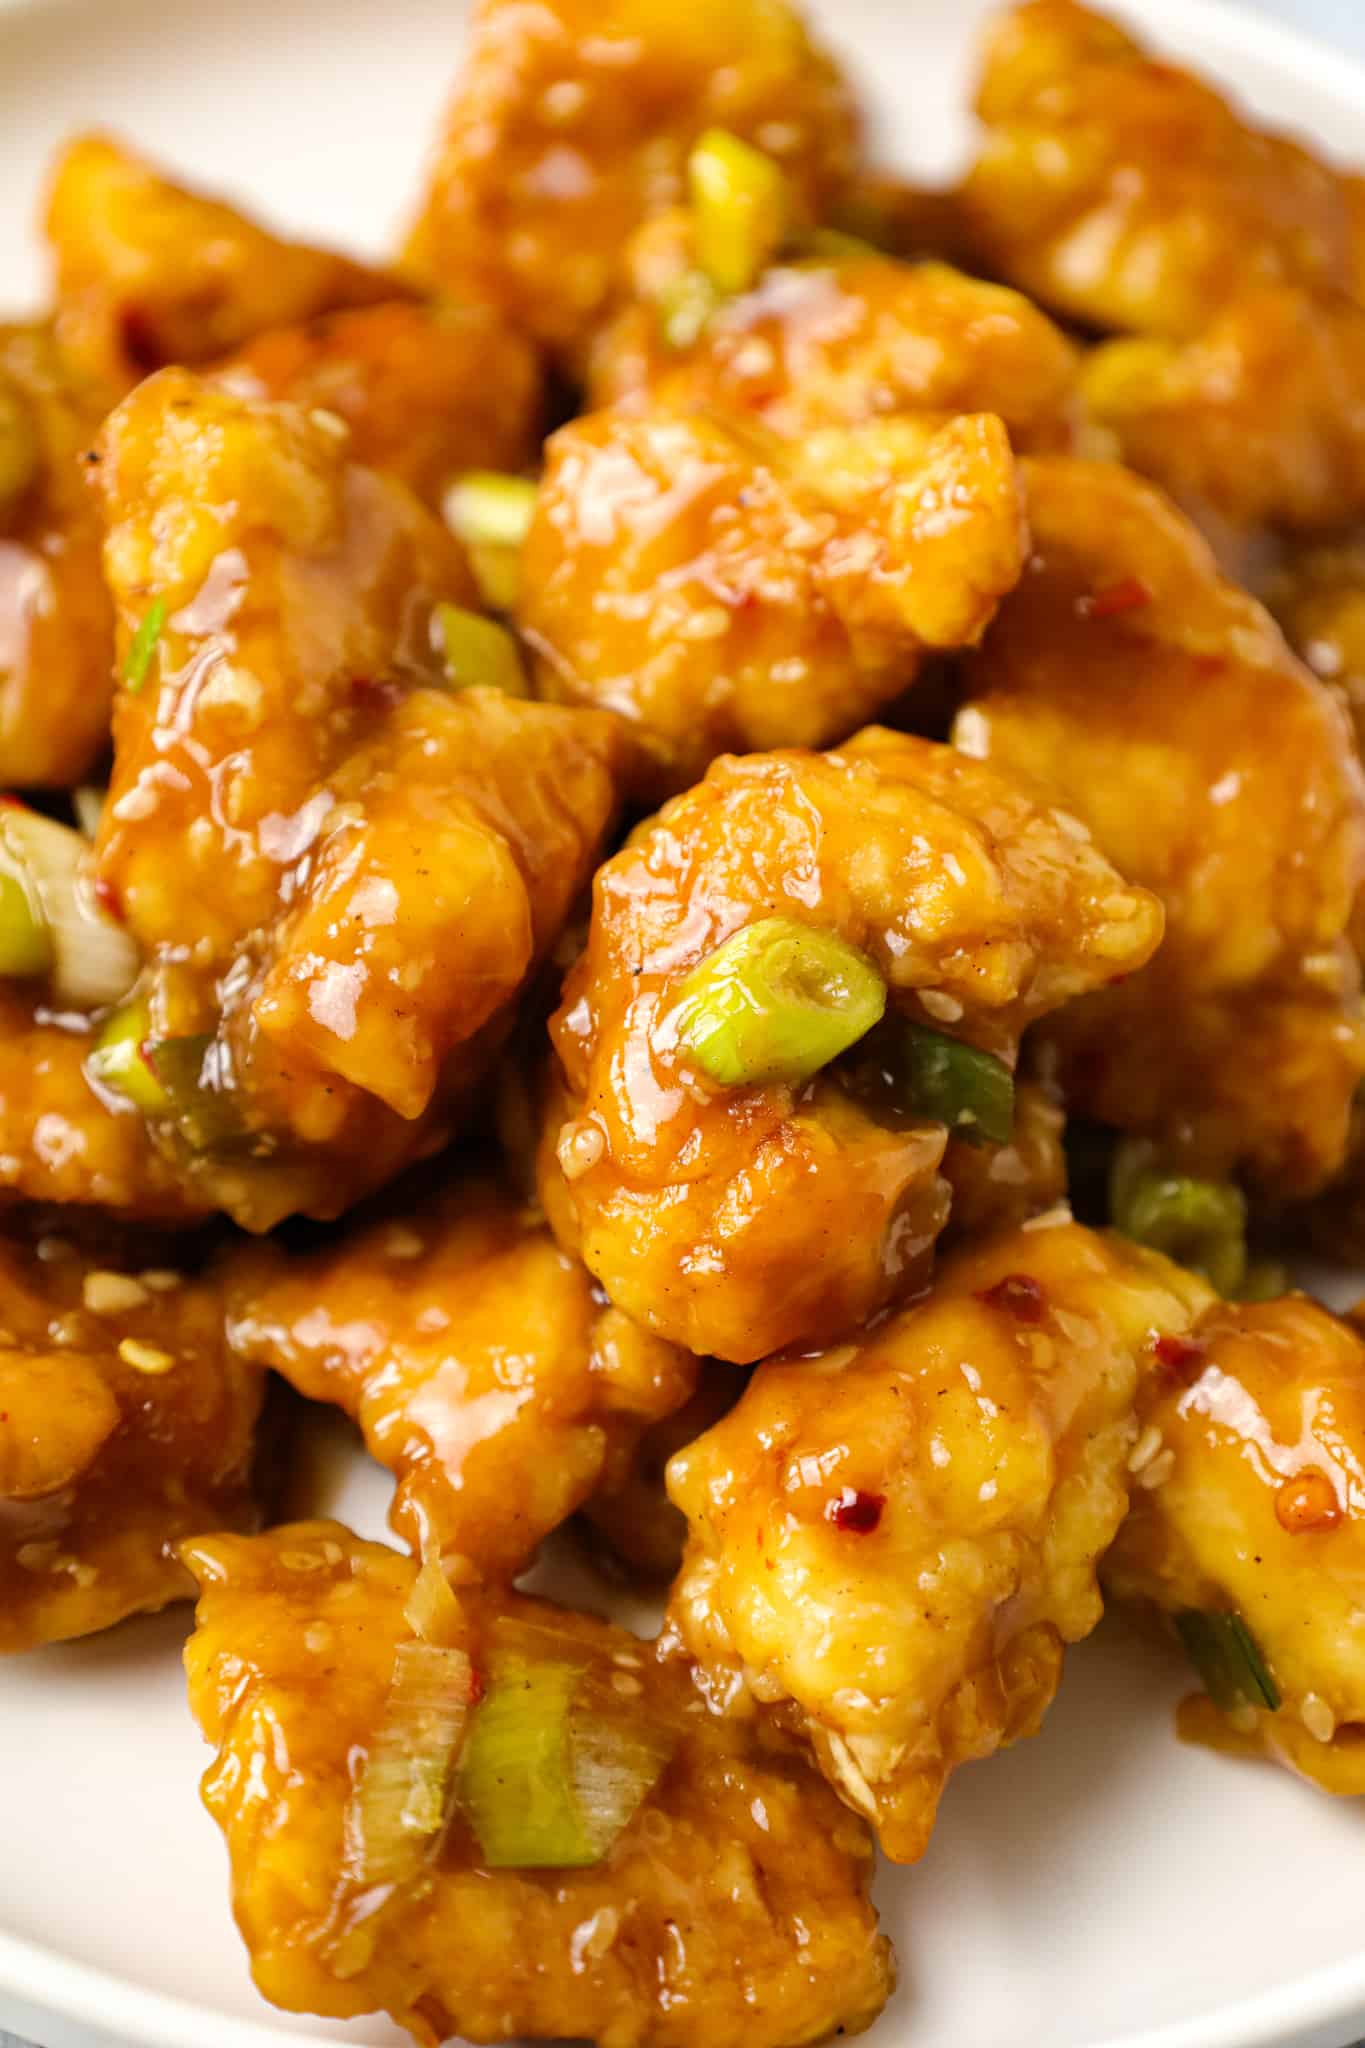 Empress Chicken is a delicious breaded Chinese chicken recipe with a spicy sweet and sour sauce.